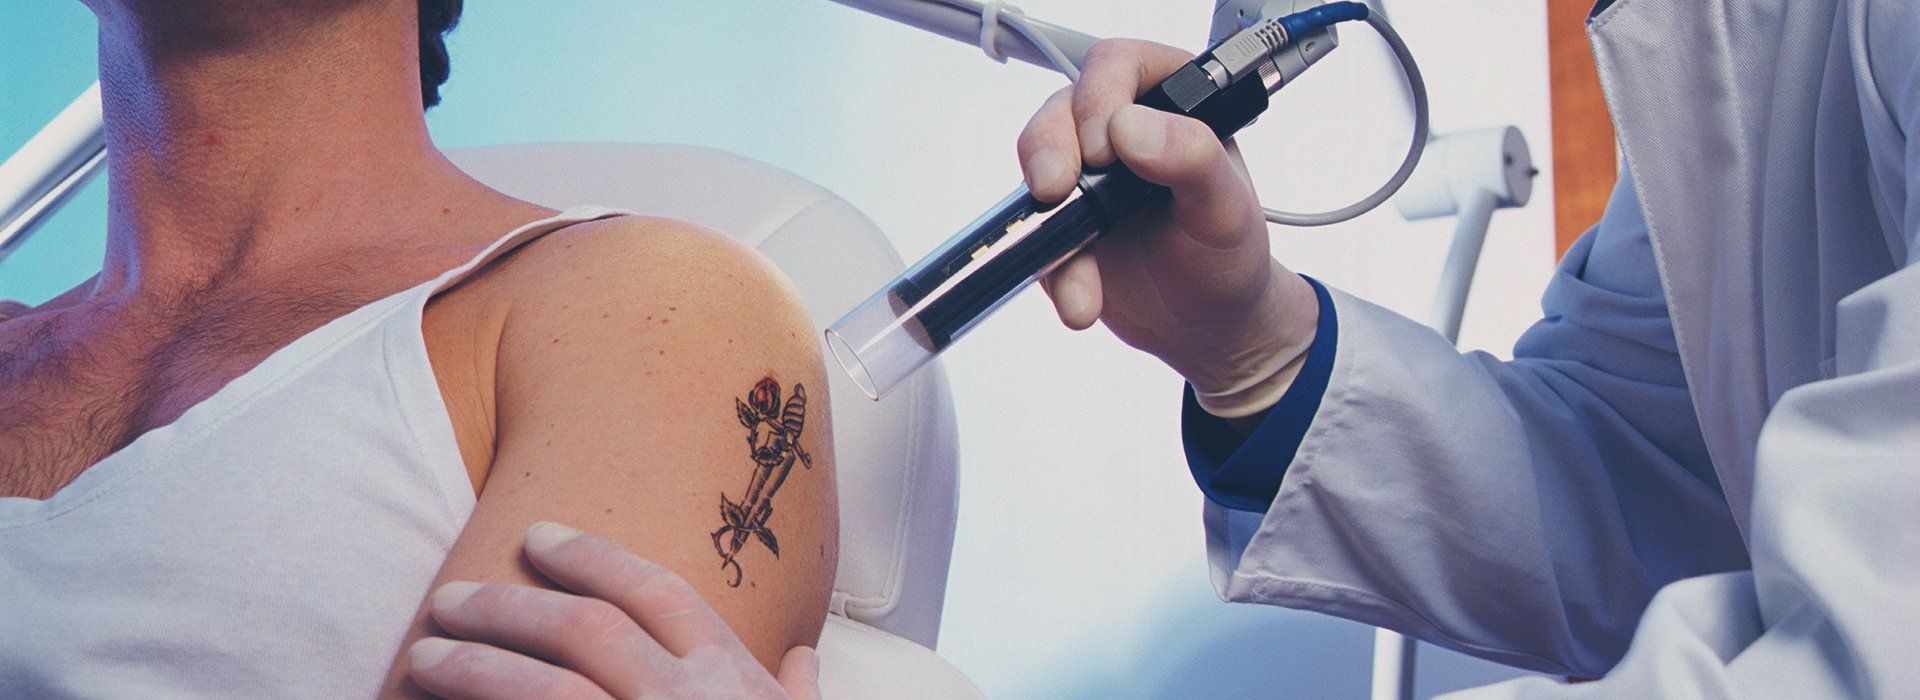 Laser Tattoo Removal in Southend-on-Sea, Essex - JR Medical